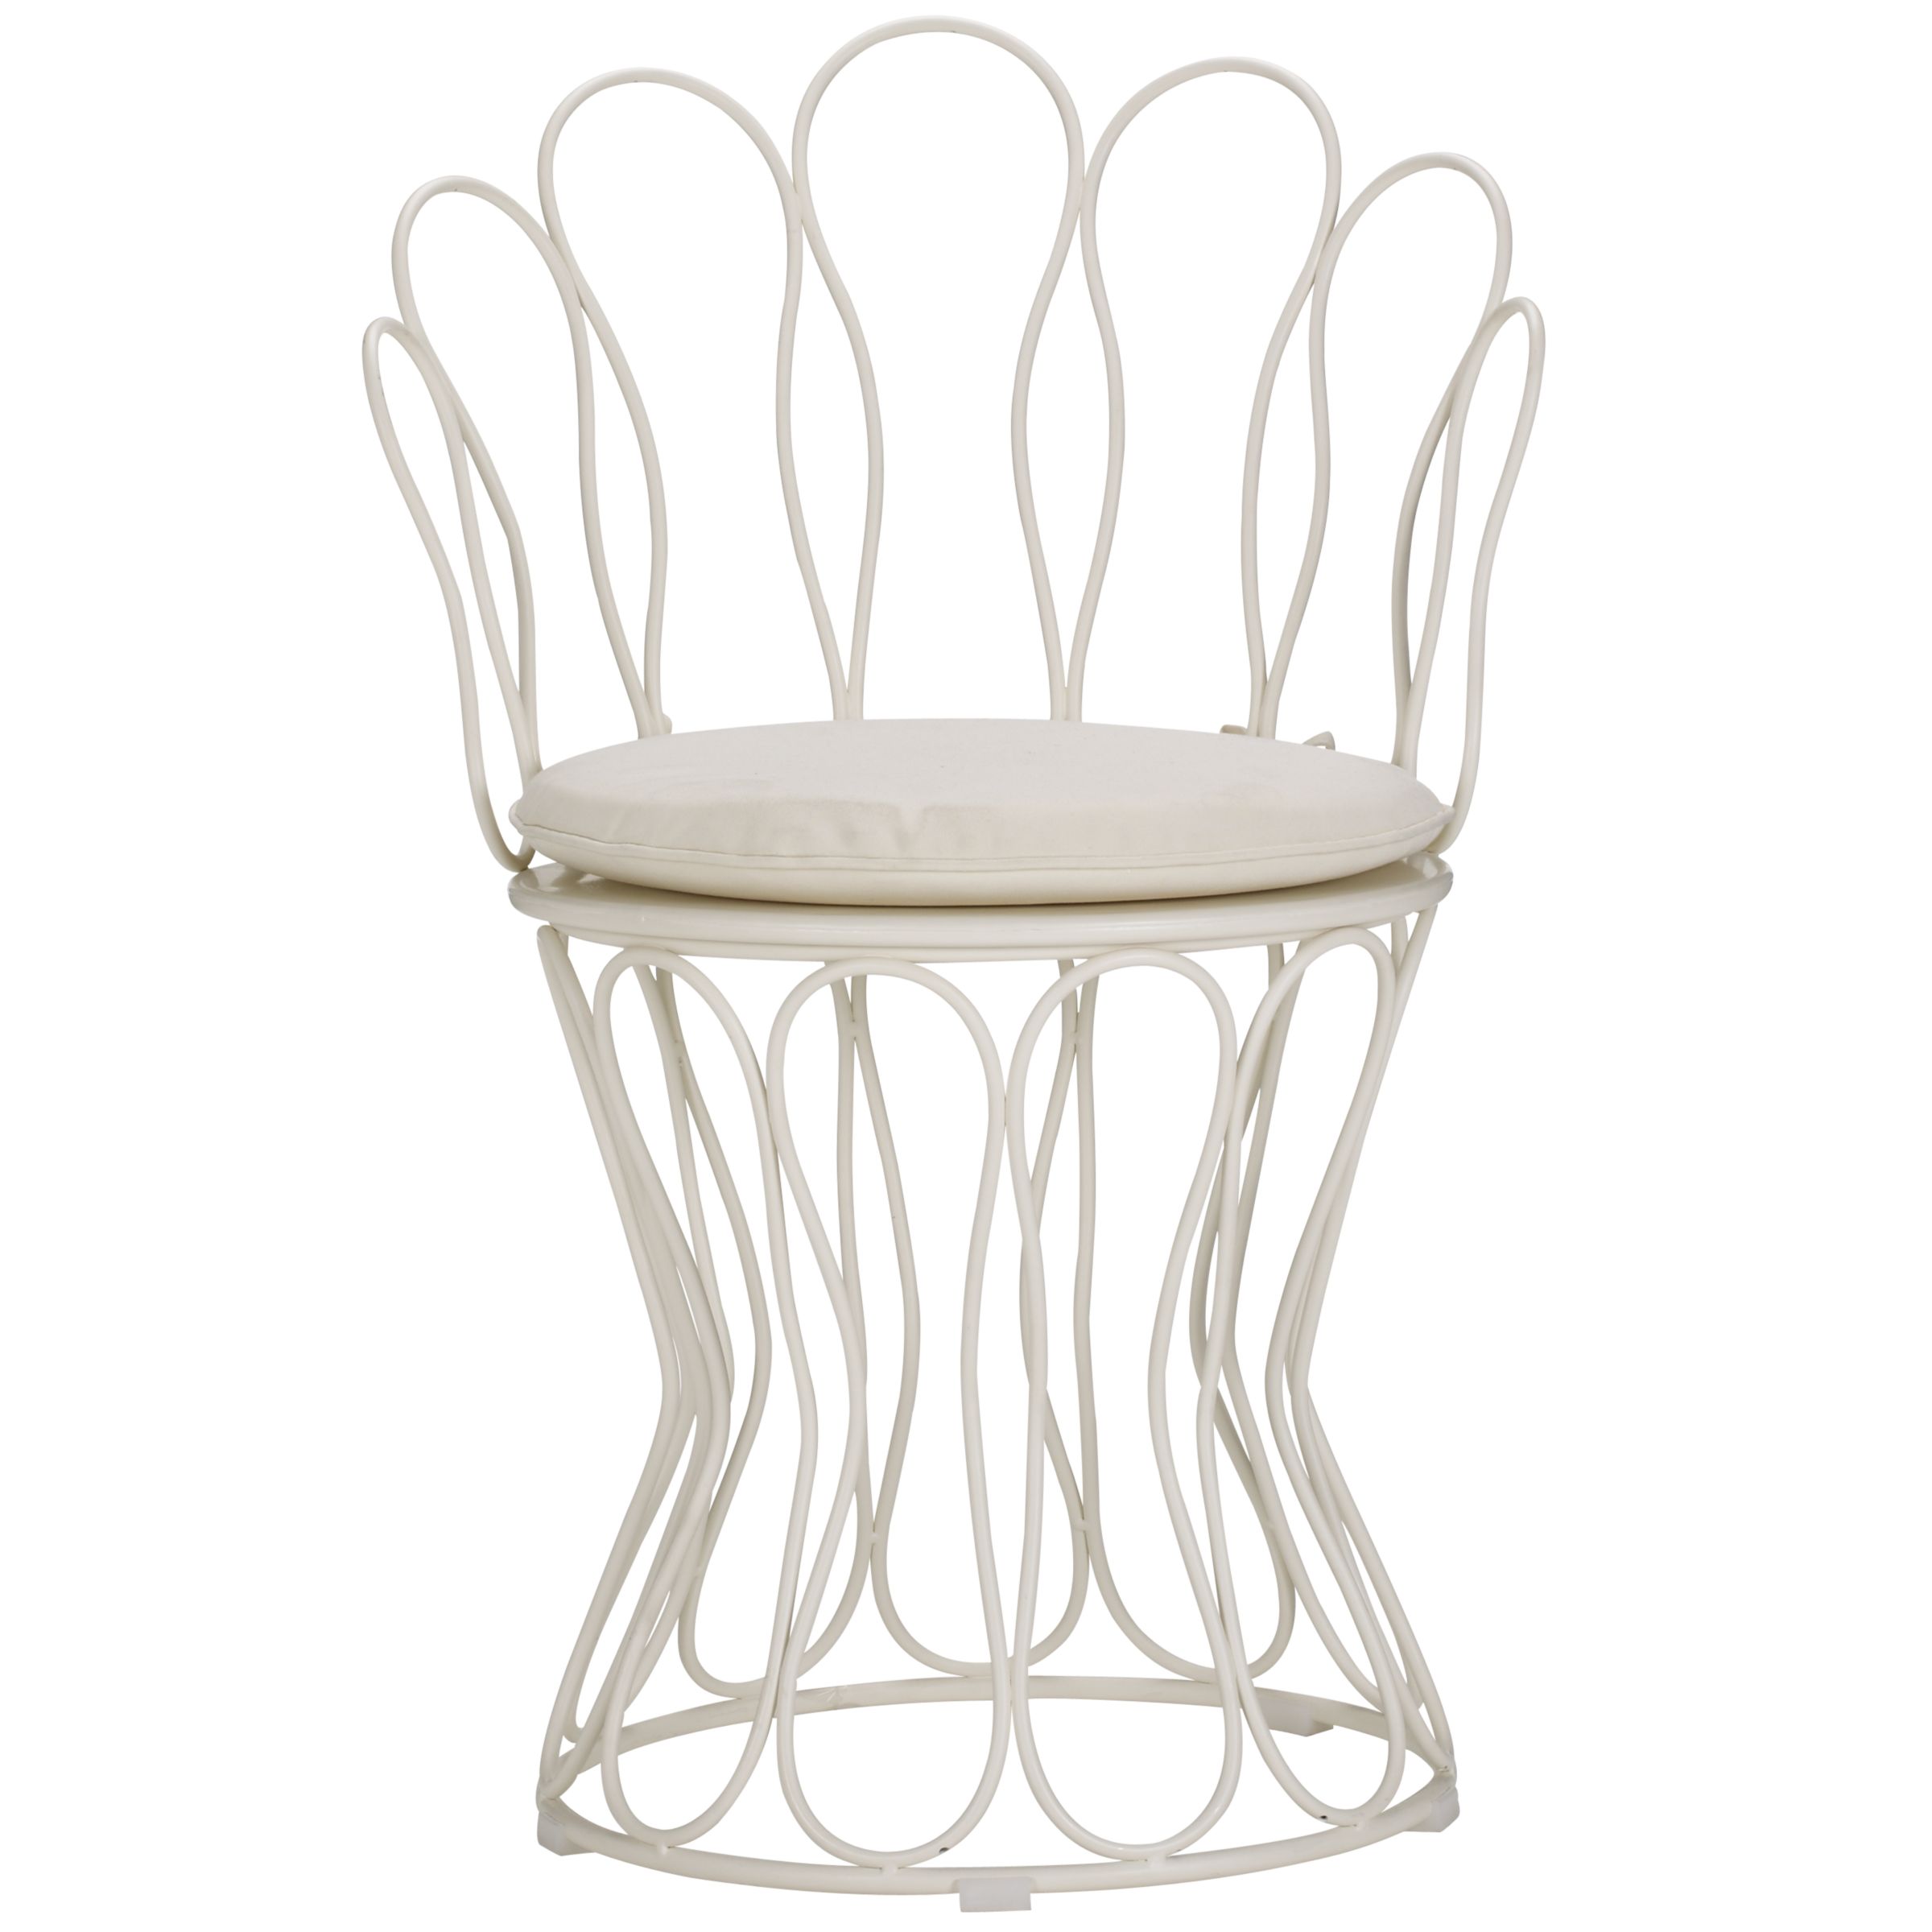 John Lewis Florence Bistro Chair, Oyster